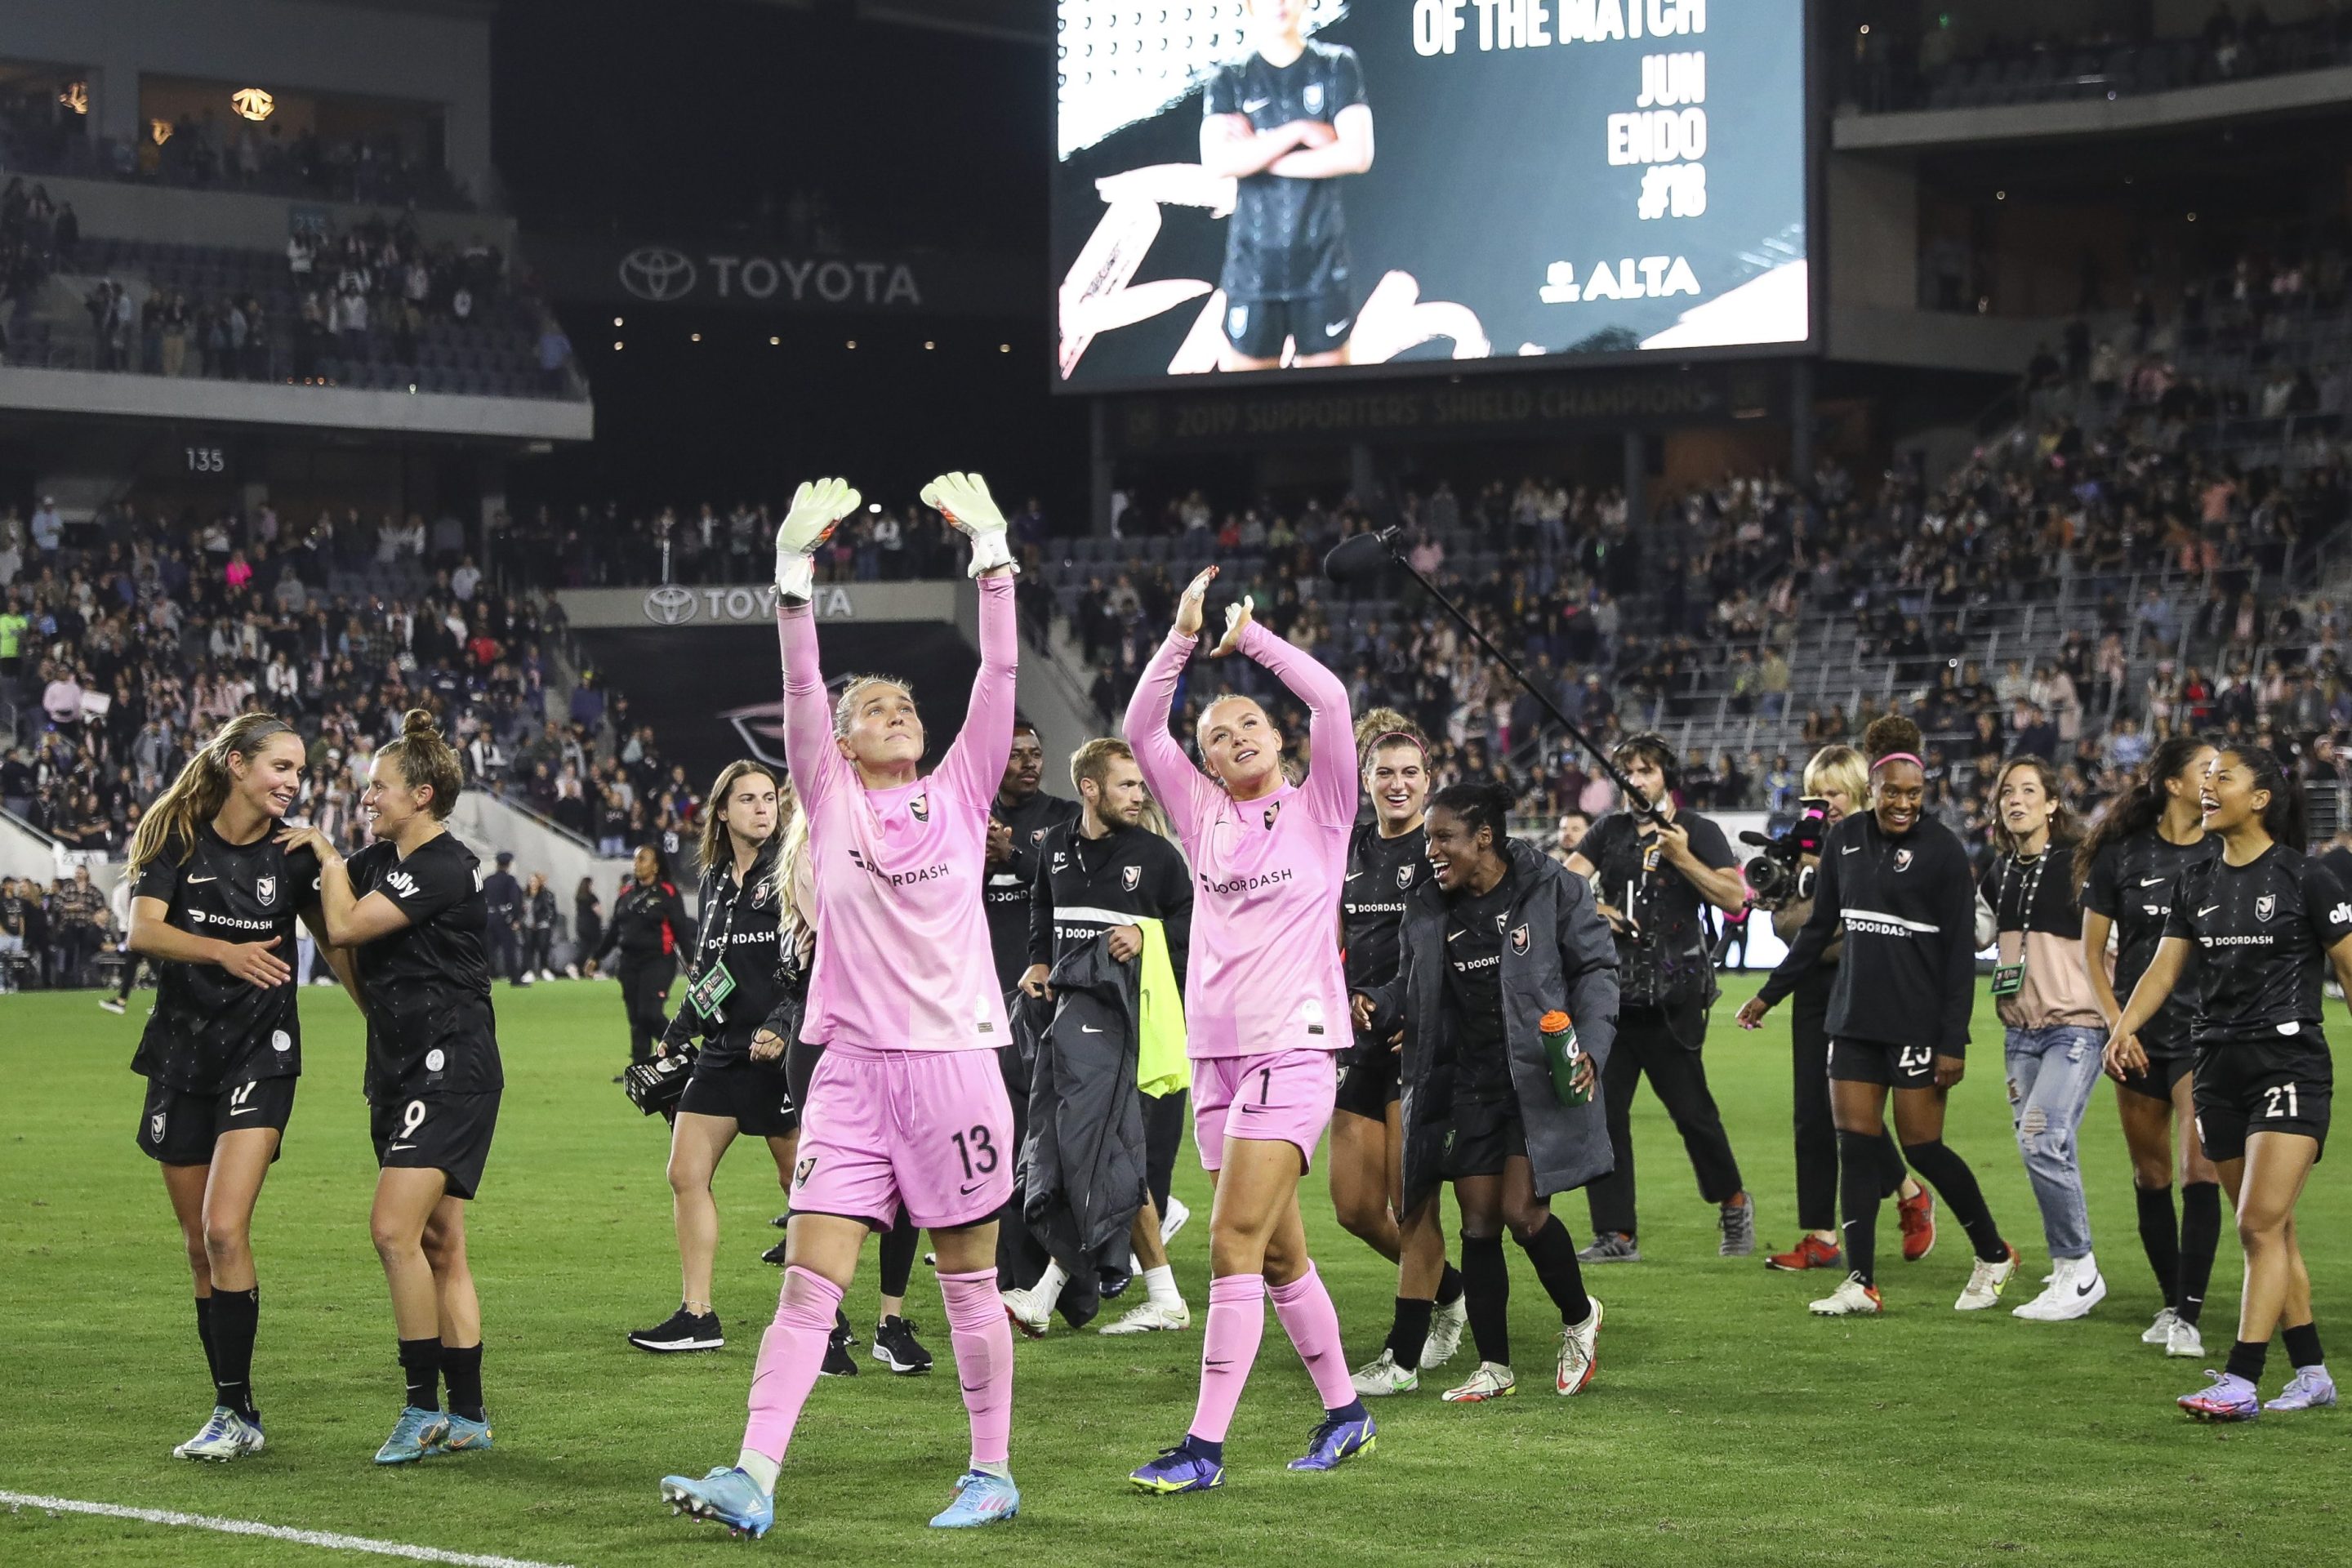 Goalkeepers DiDi Haracic #13 and Brittany Isenhour #1 of Angel City FC wave to fans after defeating North Carolina Courage at Banc of California Stadium on April 29, 2022 in Los Angeles, California.